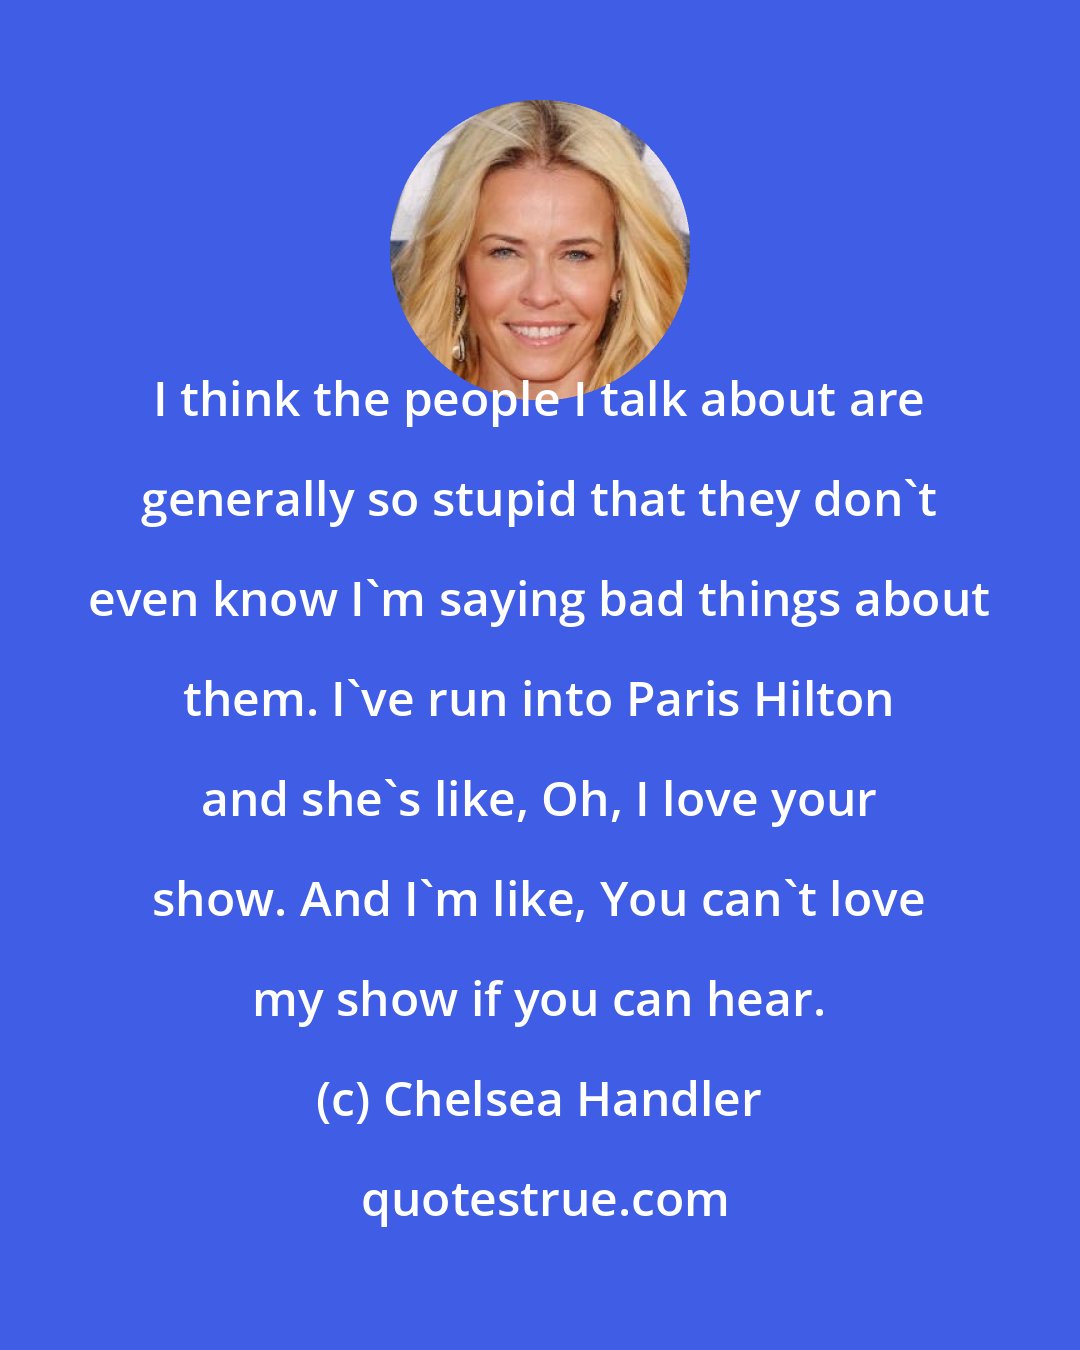 Chelsea Handler: I think the people I talk about are generally so stupid that they don't even know I'm saying bad things about them. I've run into Paris Hilton and she's like, Oh, I love your show. And I'm like, You can't love my show if you can hear.